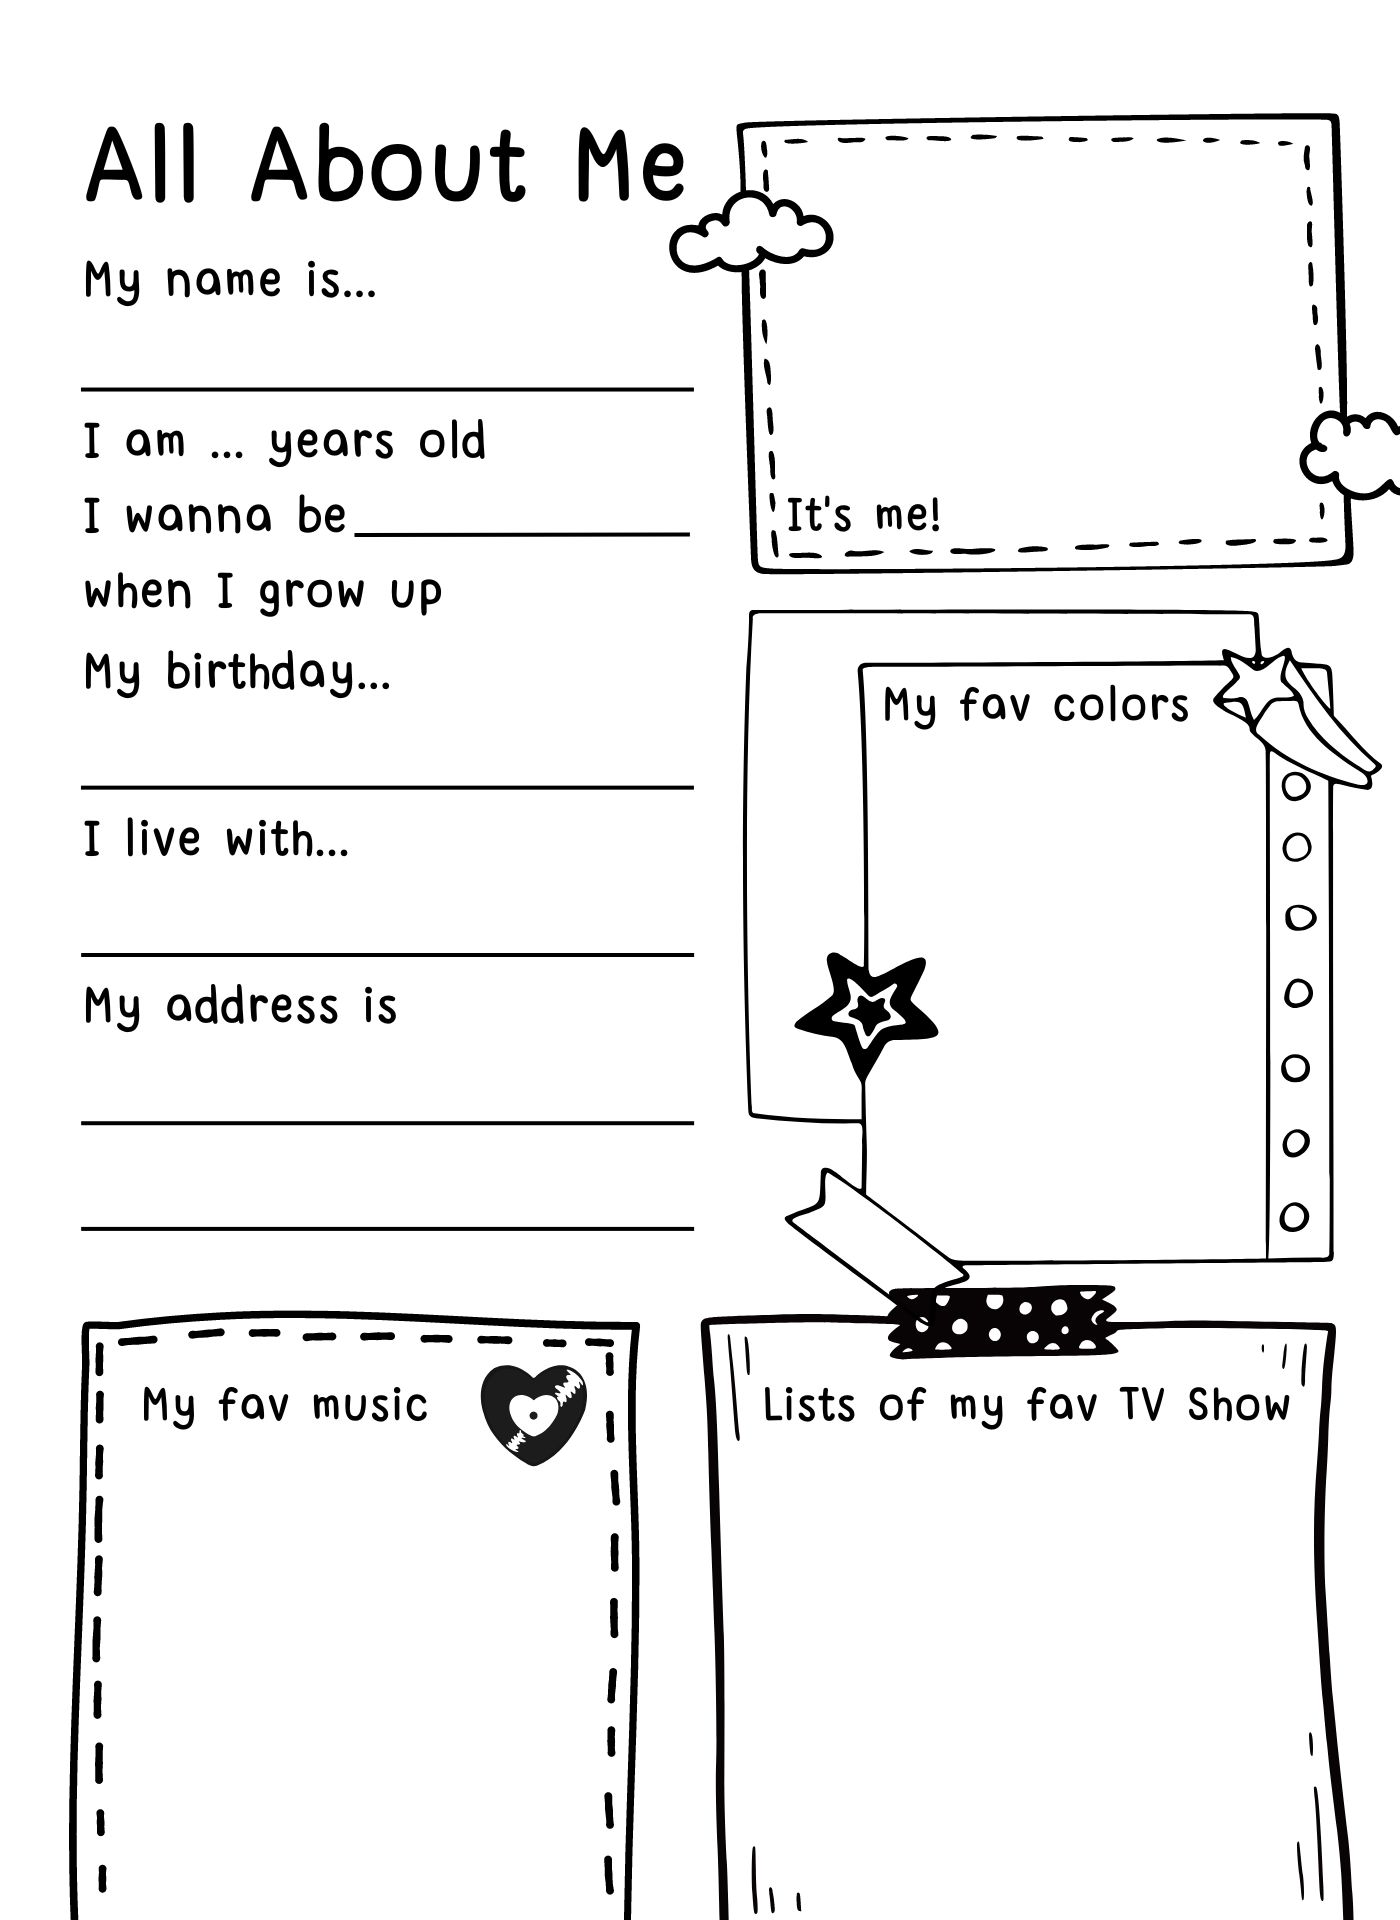 All About Me Printable Catholic Worksheets